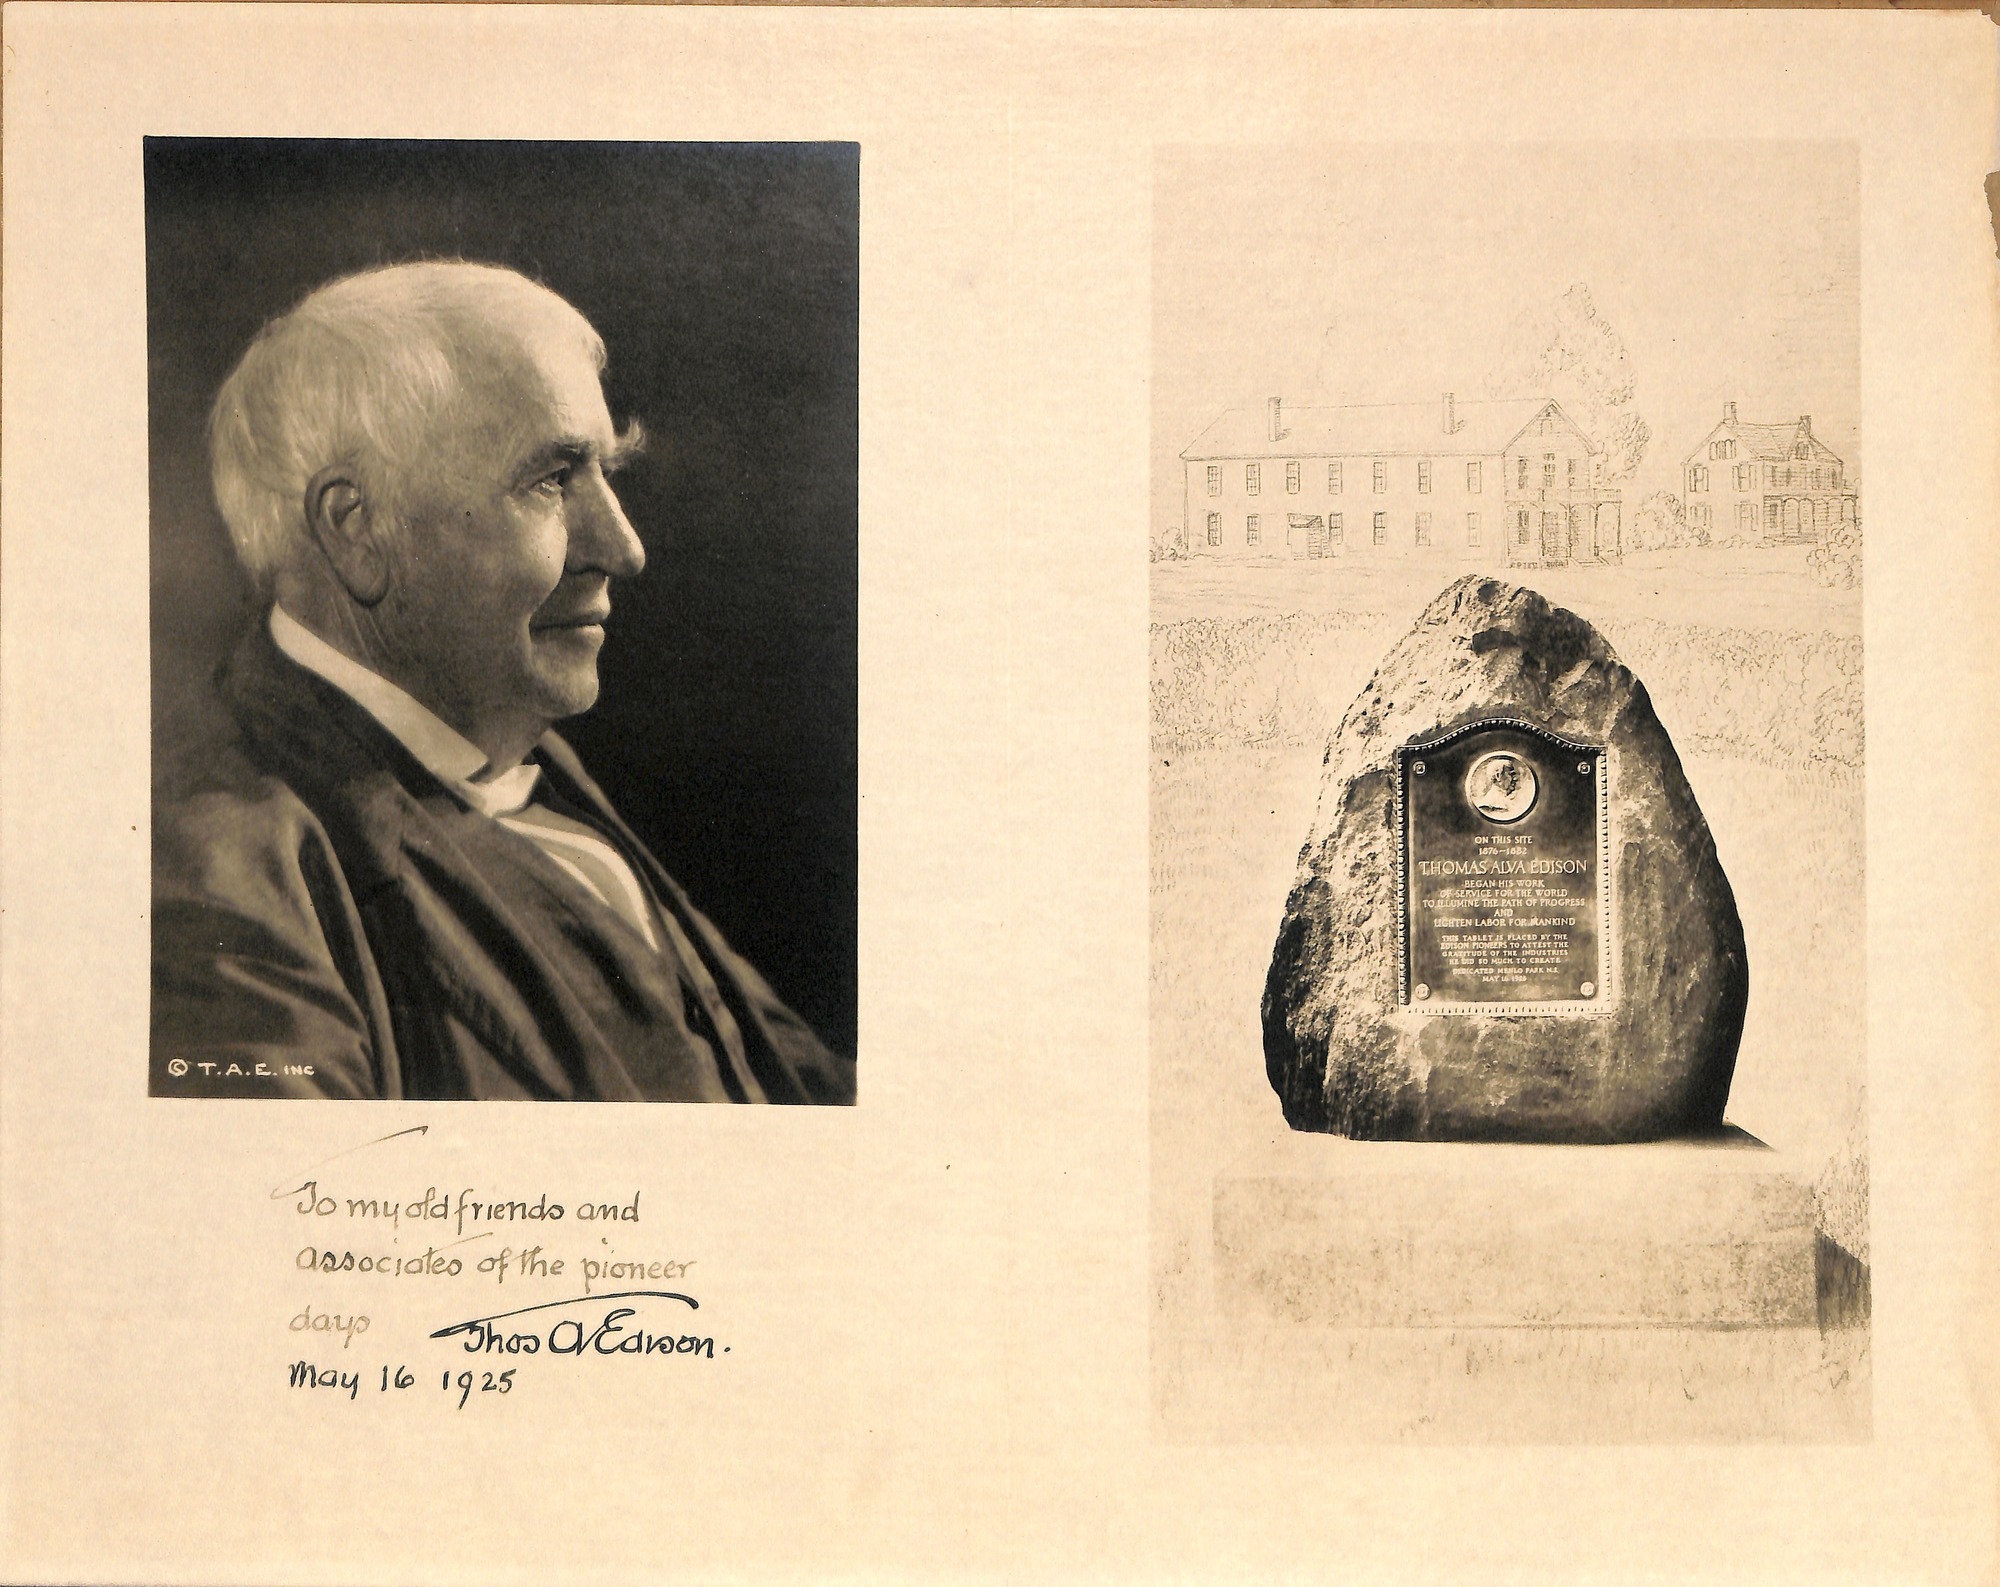 Memorial to Thomas Edison at Menlo Park, with photo of Edison and signed: "To my old friends and associates of the pioneer days, Thomas A. Edison"